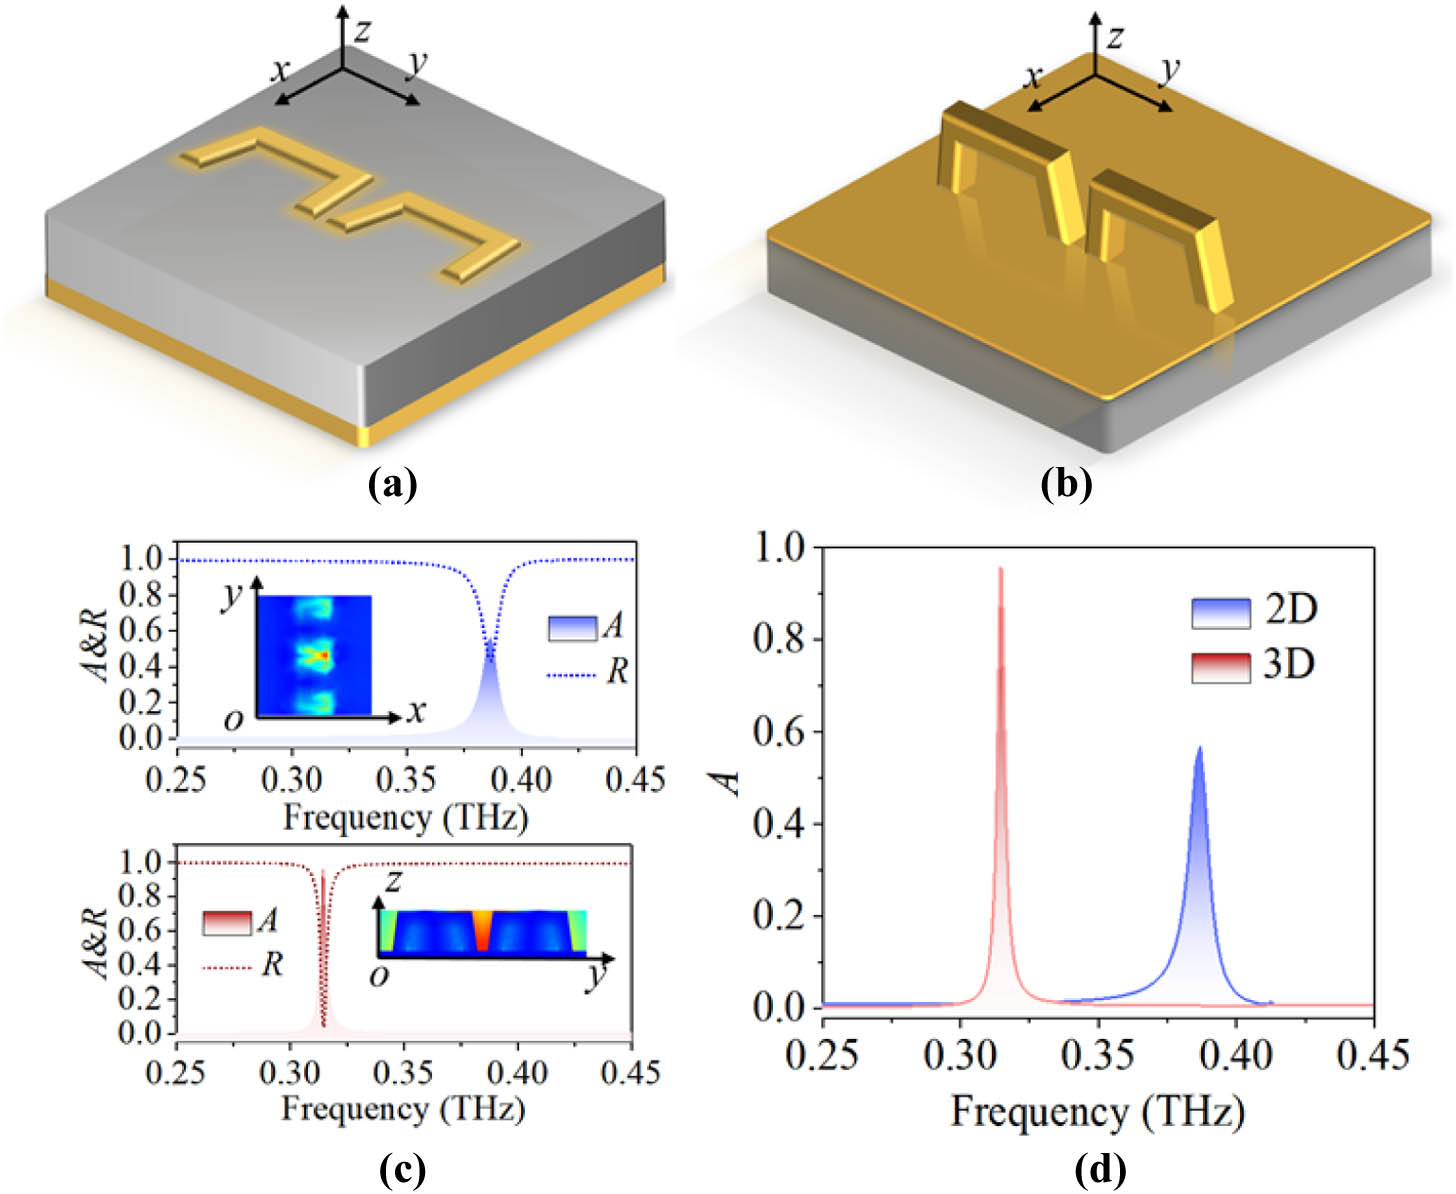 Schematic of (a) metal-insulator-metal 2D meta-absorber and (b) metal-resin 3D meta-absorber. (c) Absorption and reflection spectra of the 2D and 3D metamaterial absorber under y-polarization. (d) Comparison of absorption spectra.